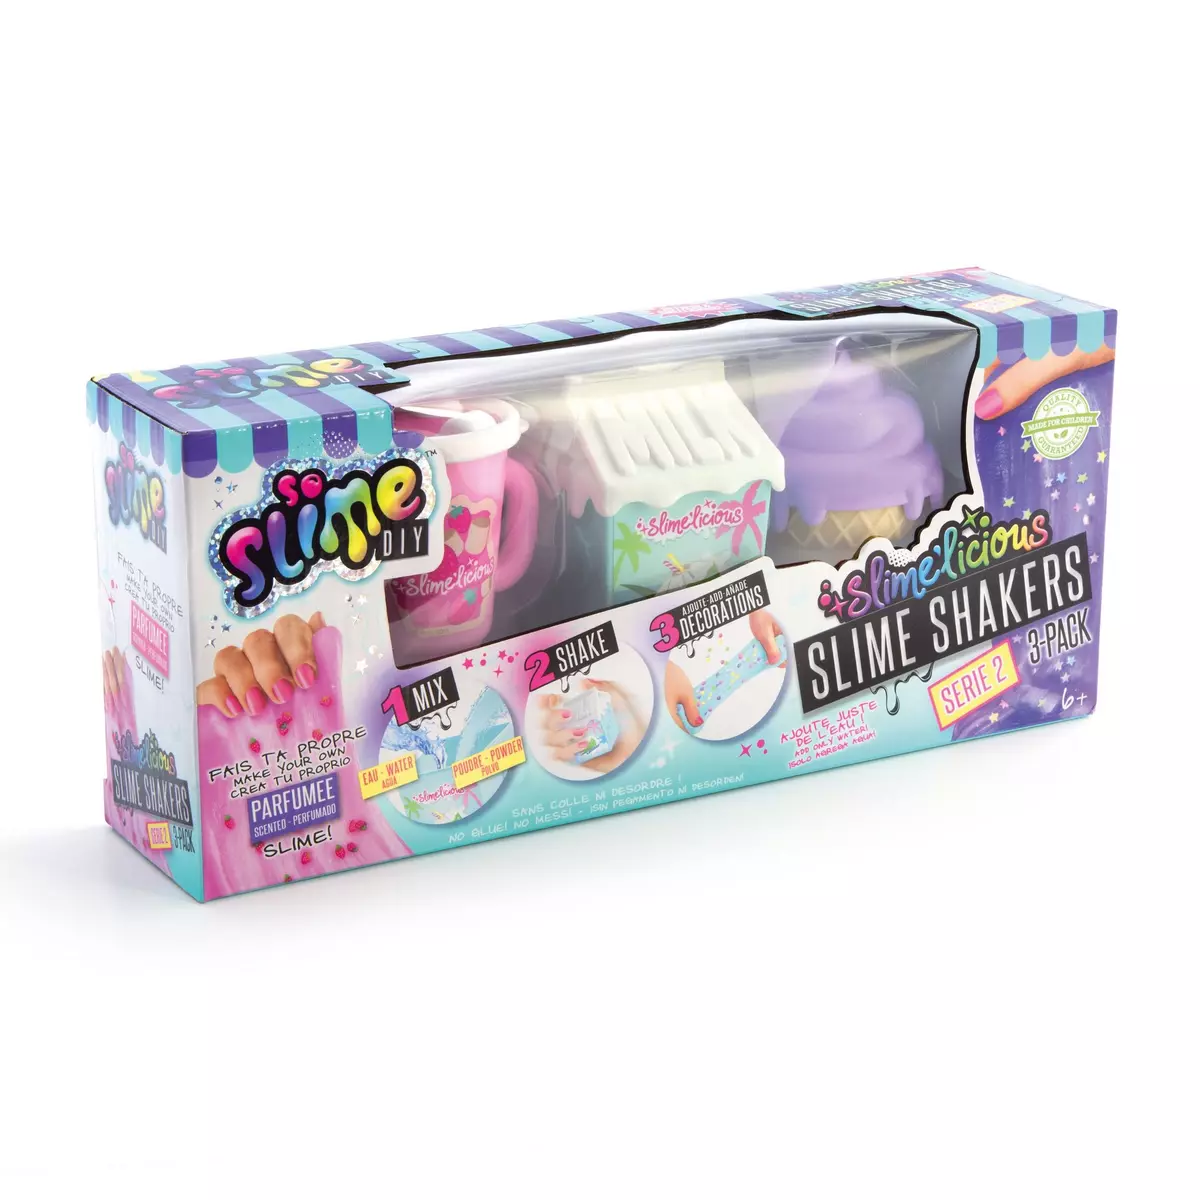 CANAL TOYS Slime 'licious 3 shakers diy - Refresh